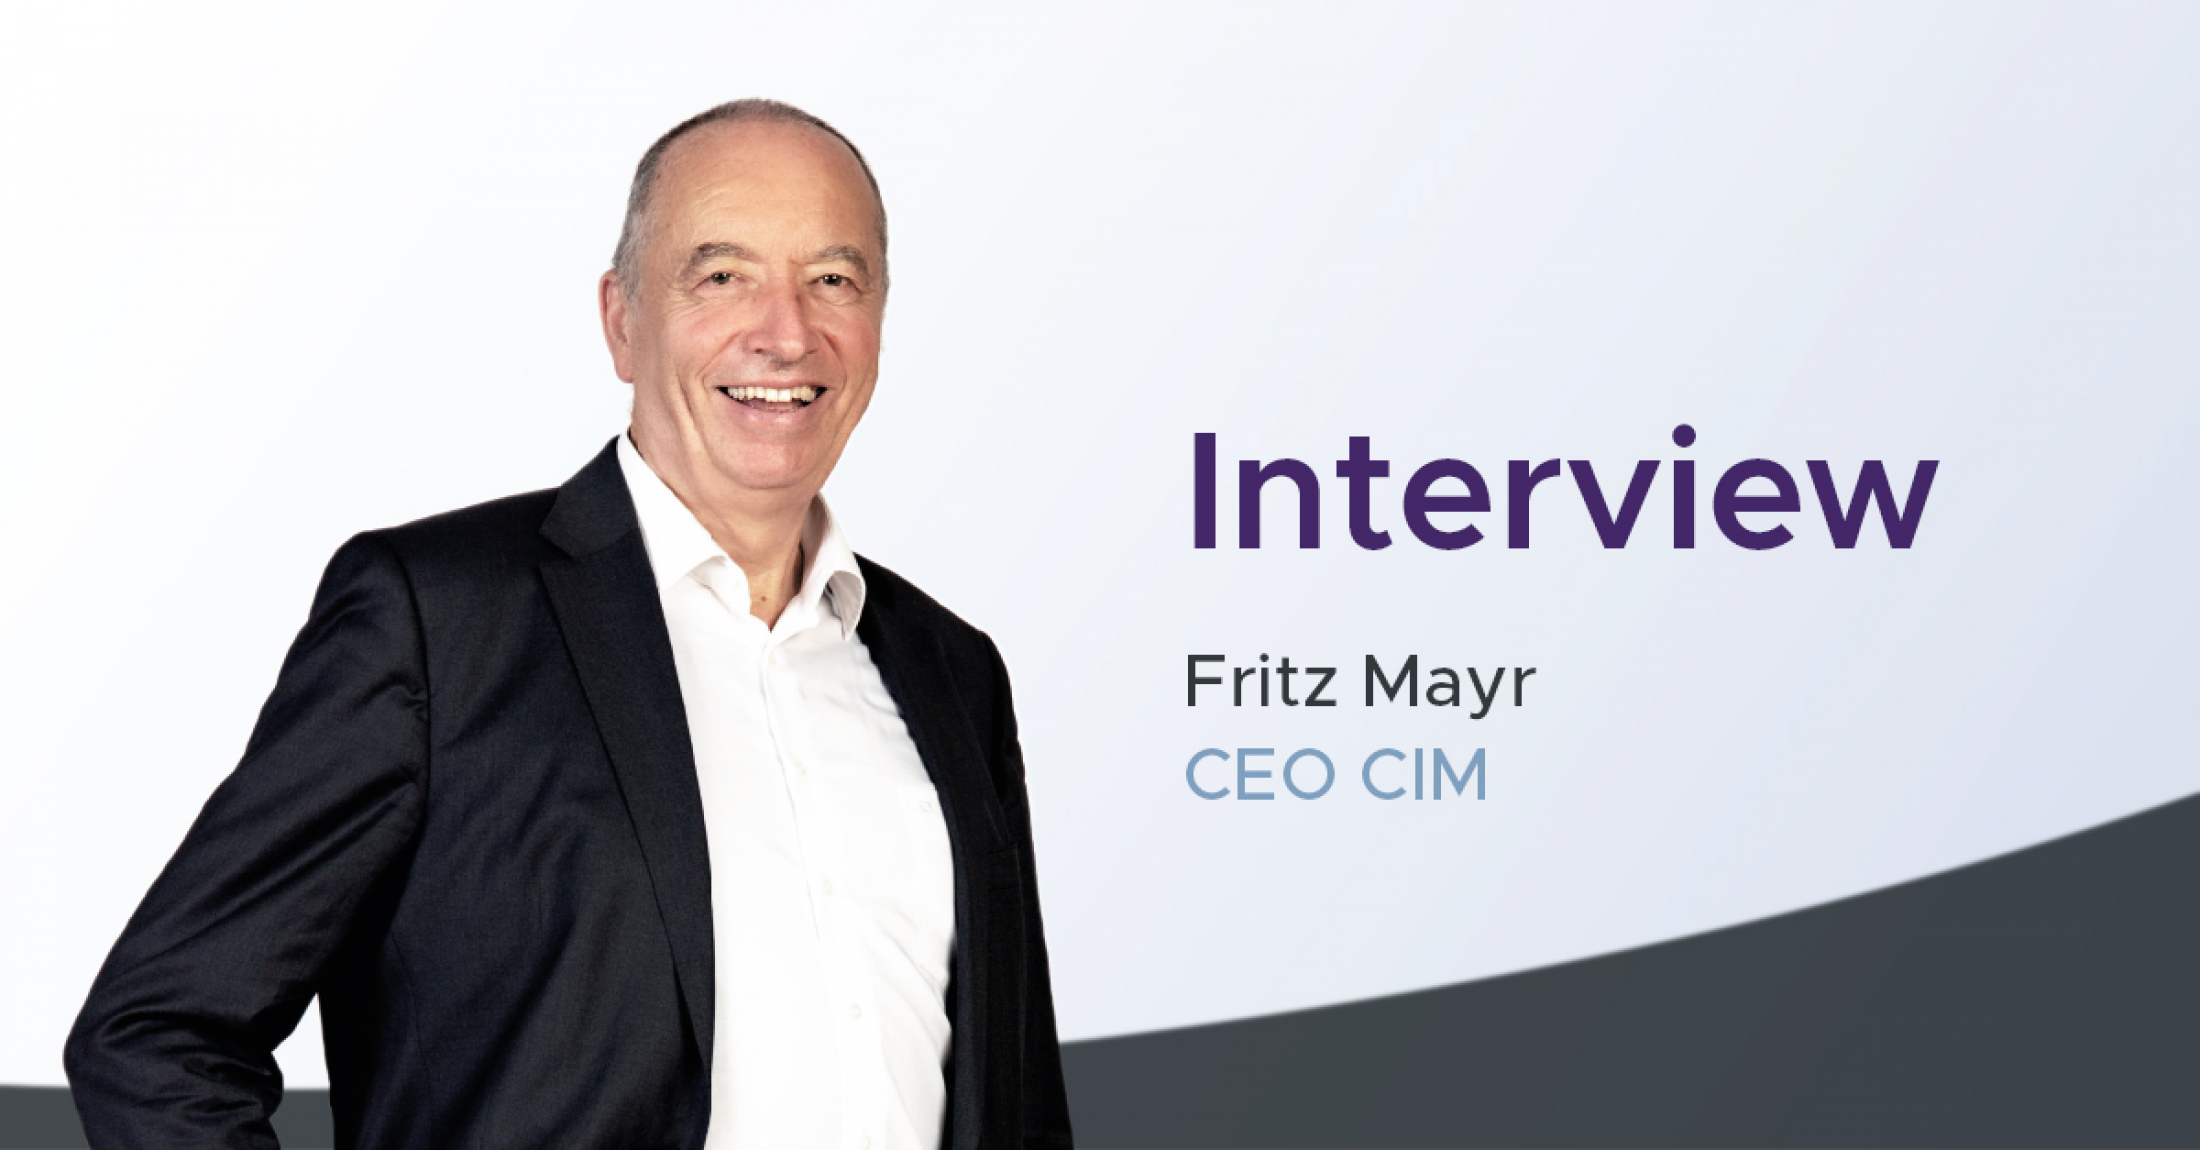 An interview with Fritz Mayr on intralogistics trends - part 1